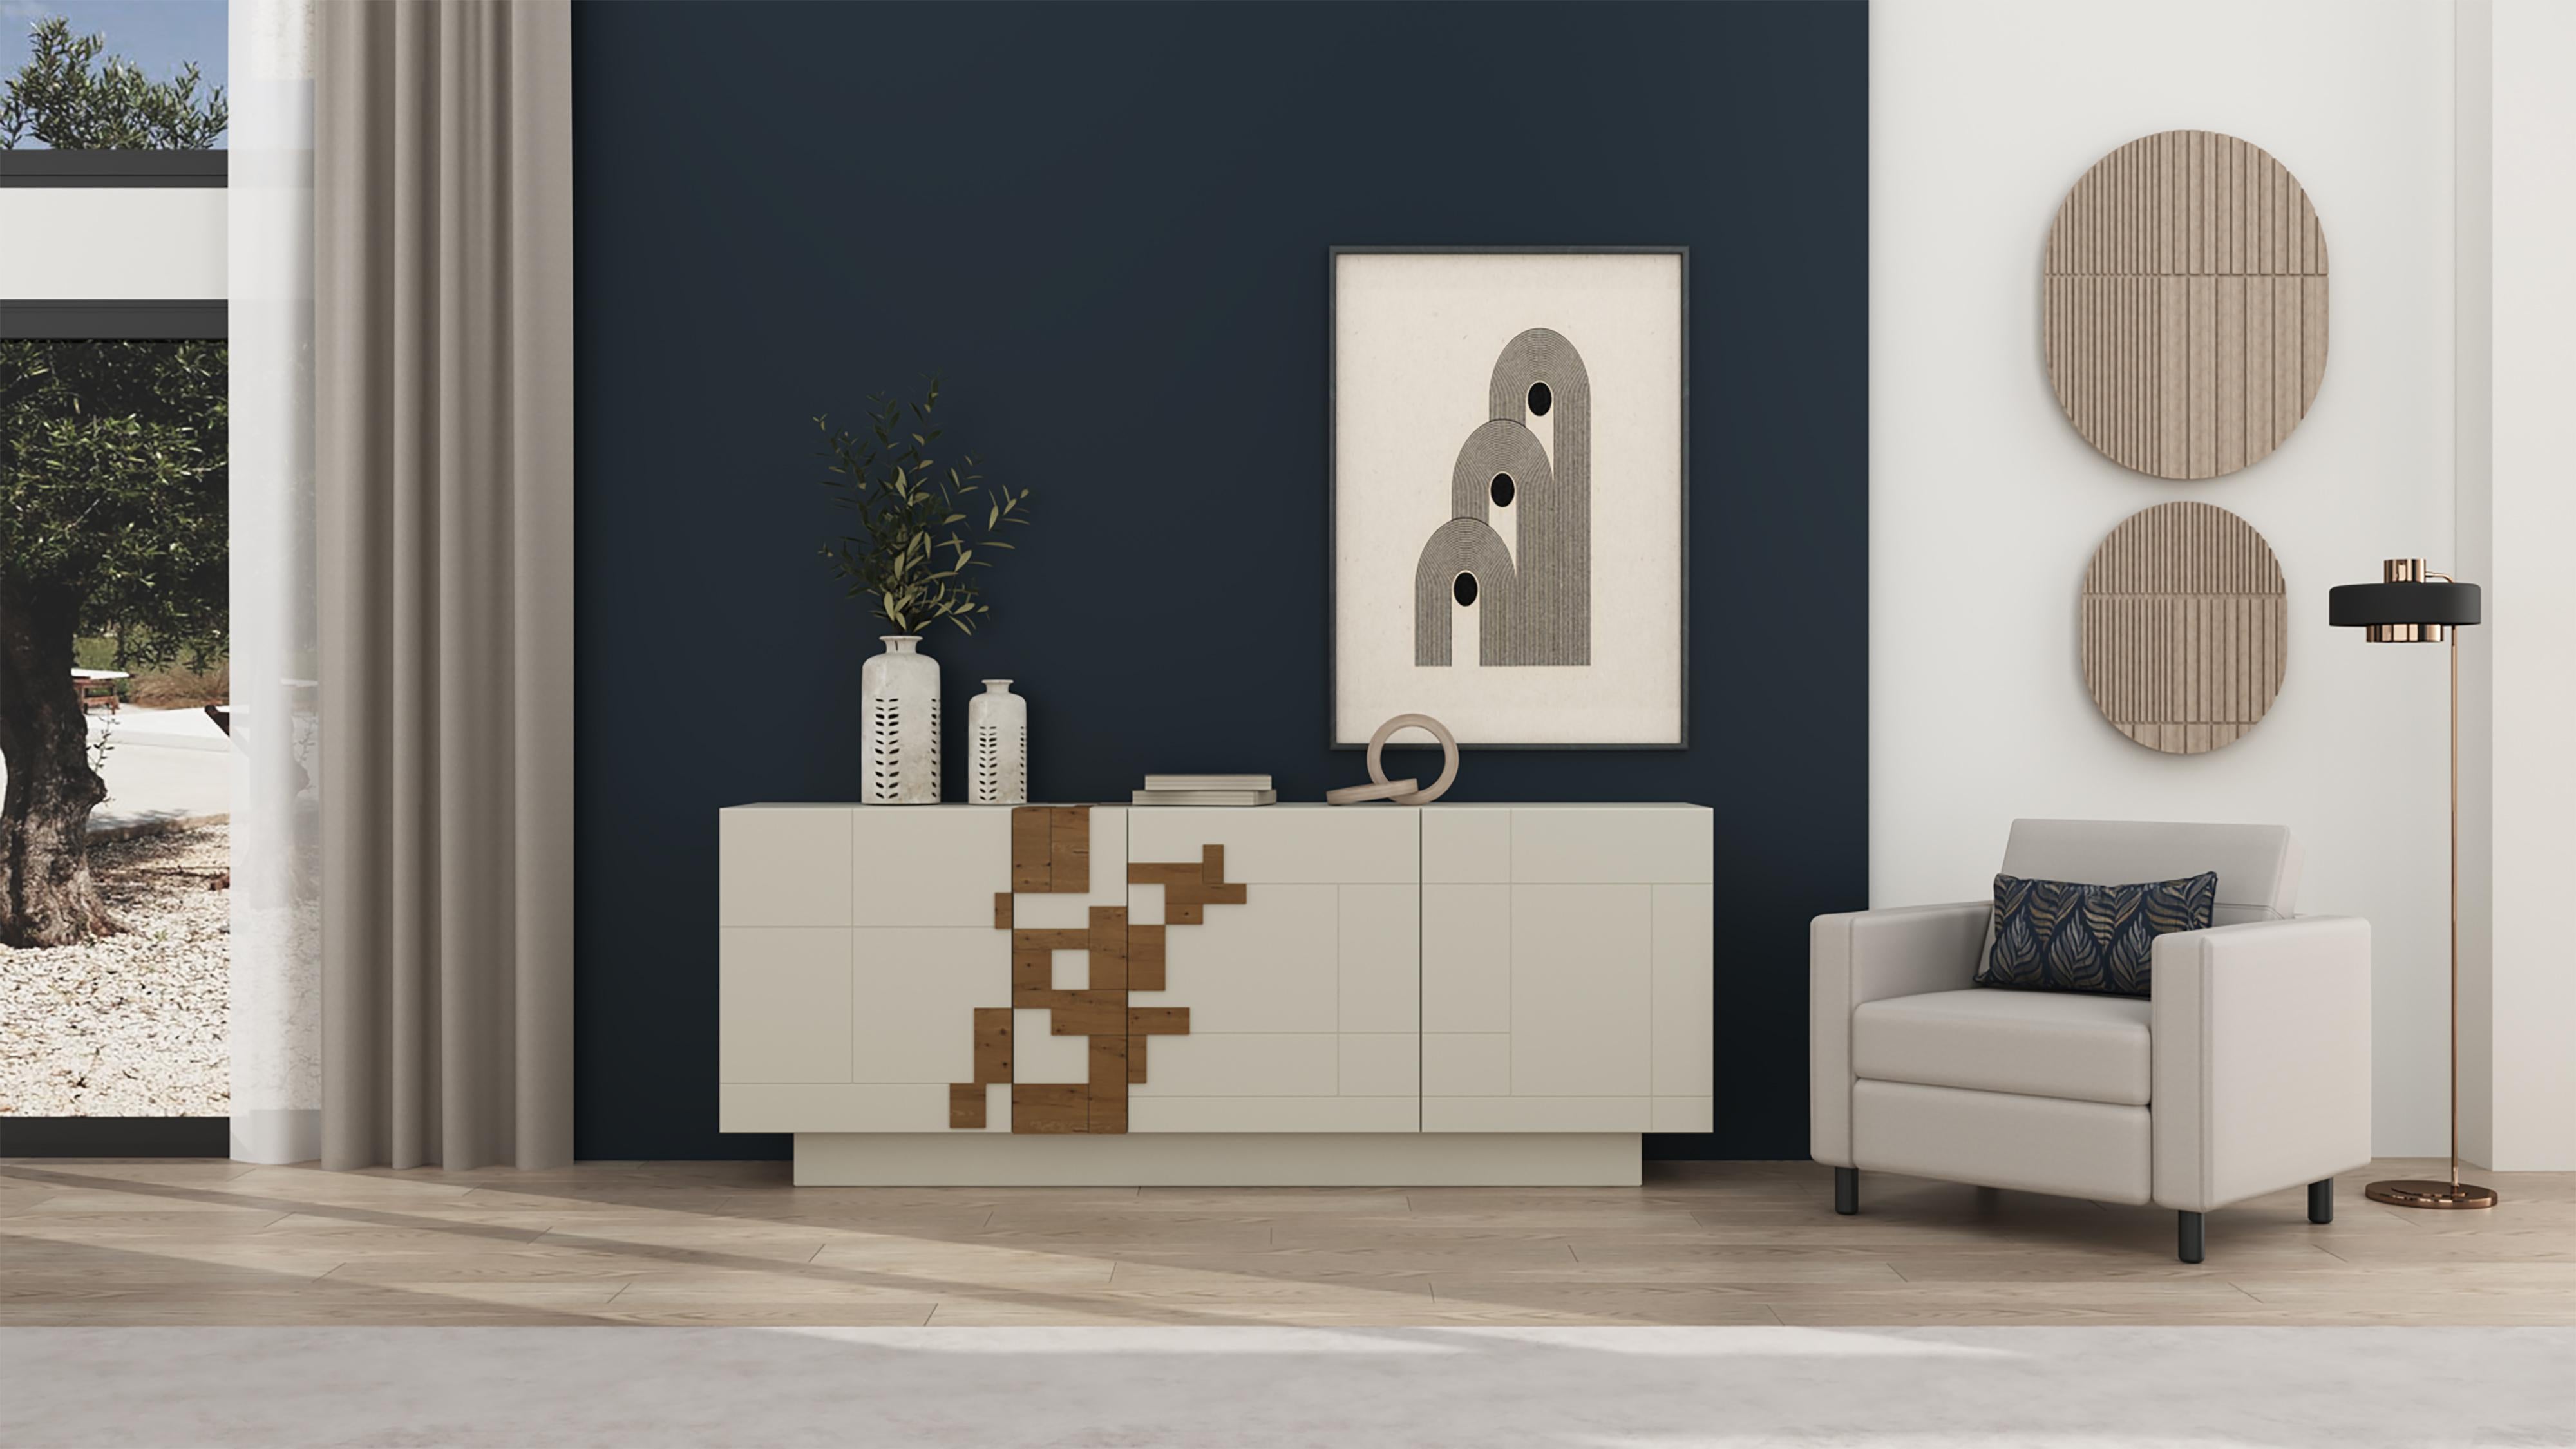 The Wembley sideboard, which is 100% produced in Portugal (Europe), combines more natural elements such as wood with animovel's high quality lacquers.

Designed by the French product designer Christophe Lecomte, this practical piece offers high